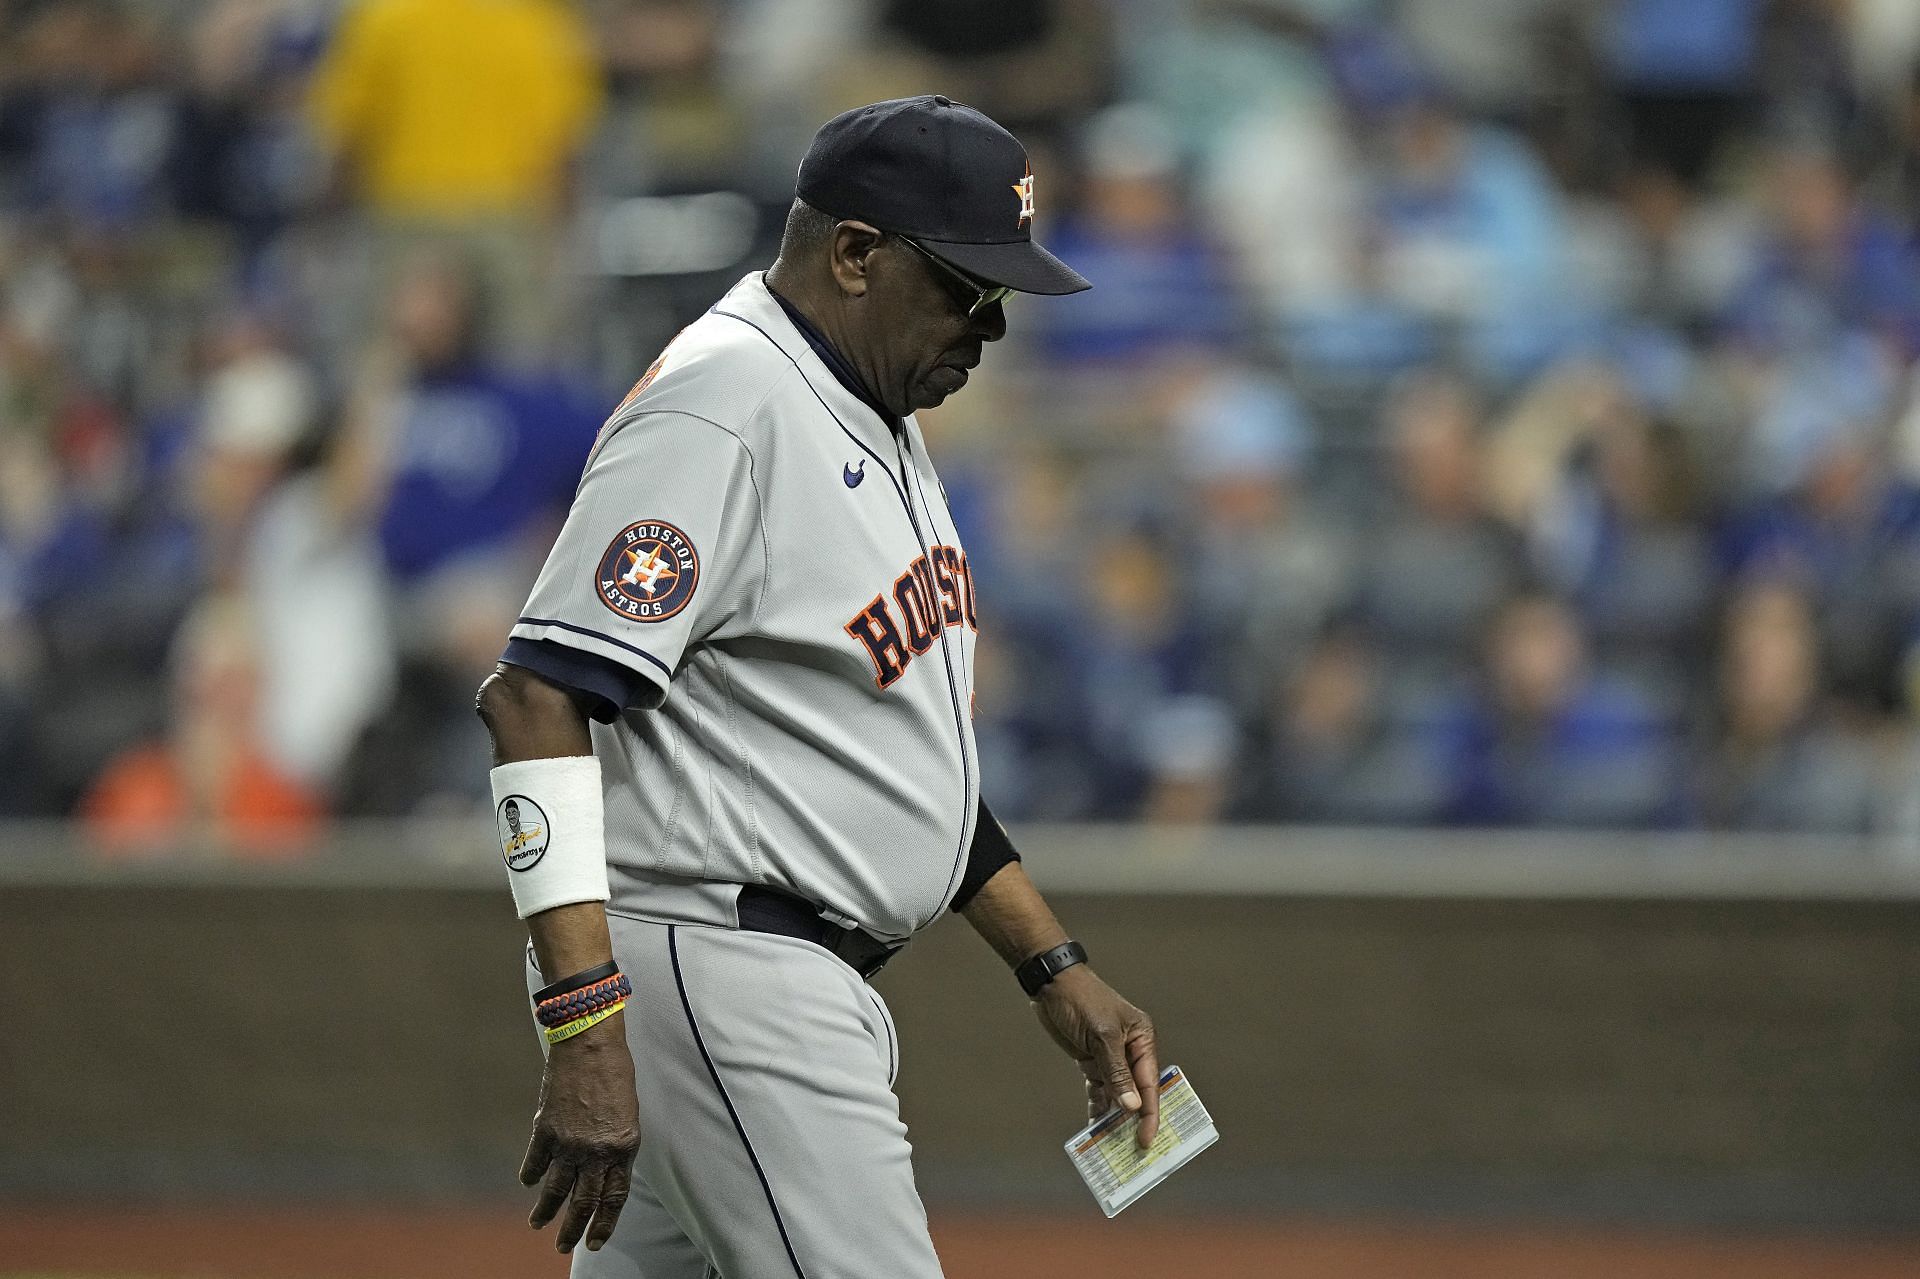 Houston Astros manager Dusty Baker Jr. walks to the dugout after making a pitching change in Kansas City